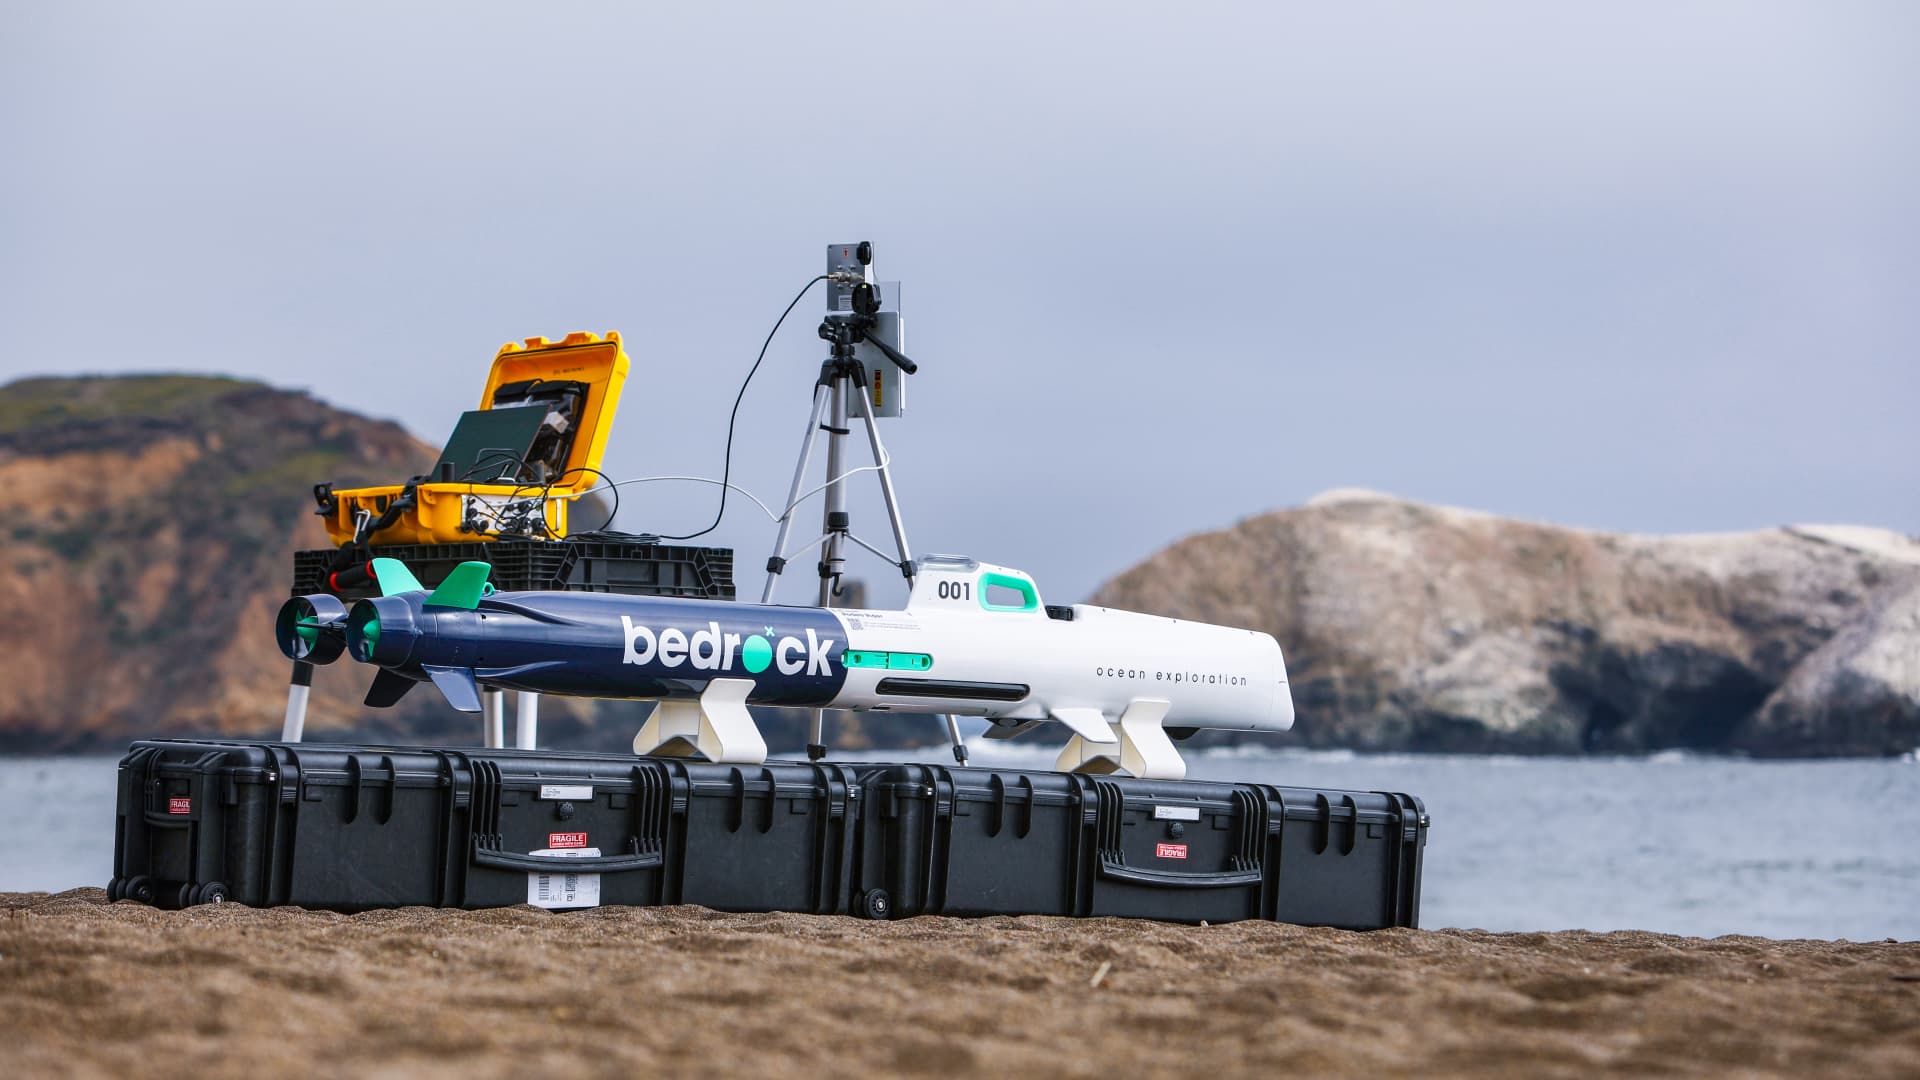 Bedrock developed an electric, autonomous underwater vehicle and software to map the seafloor.